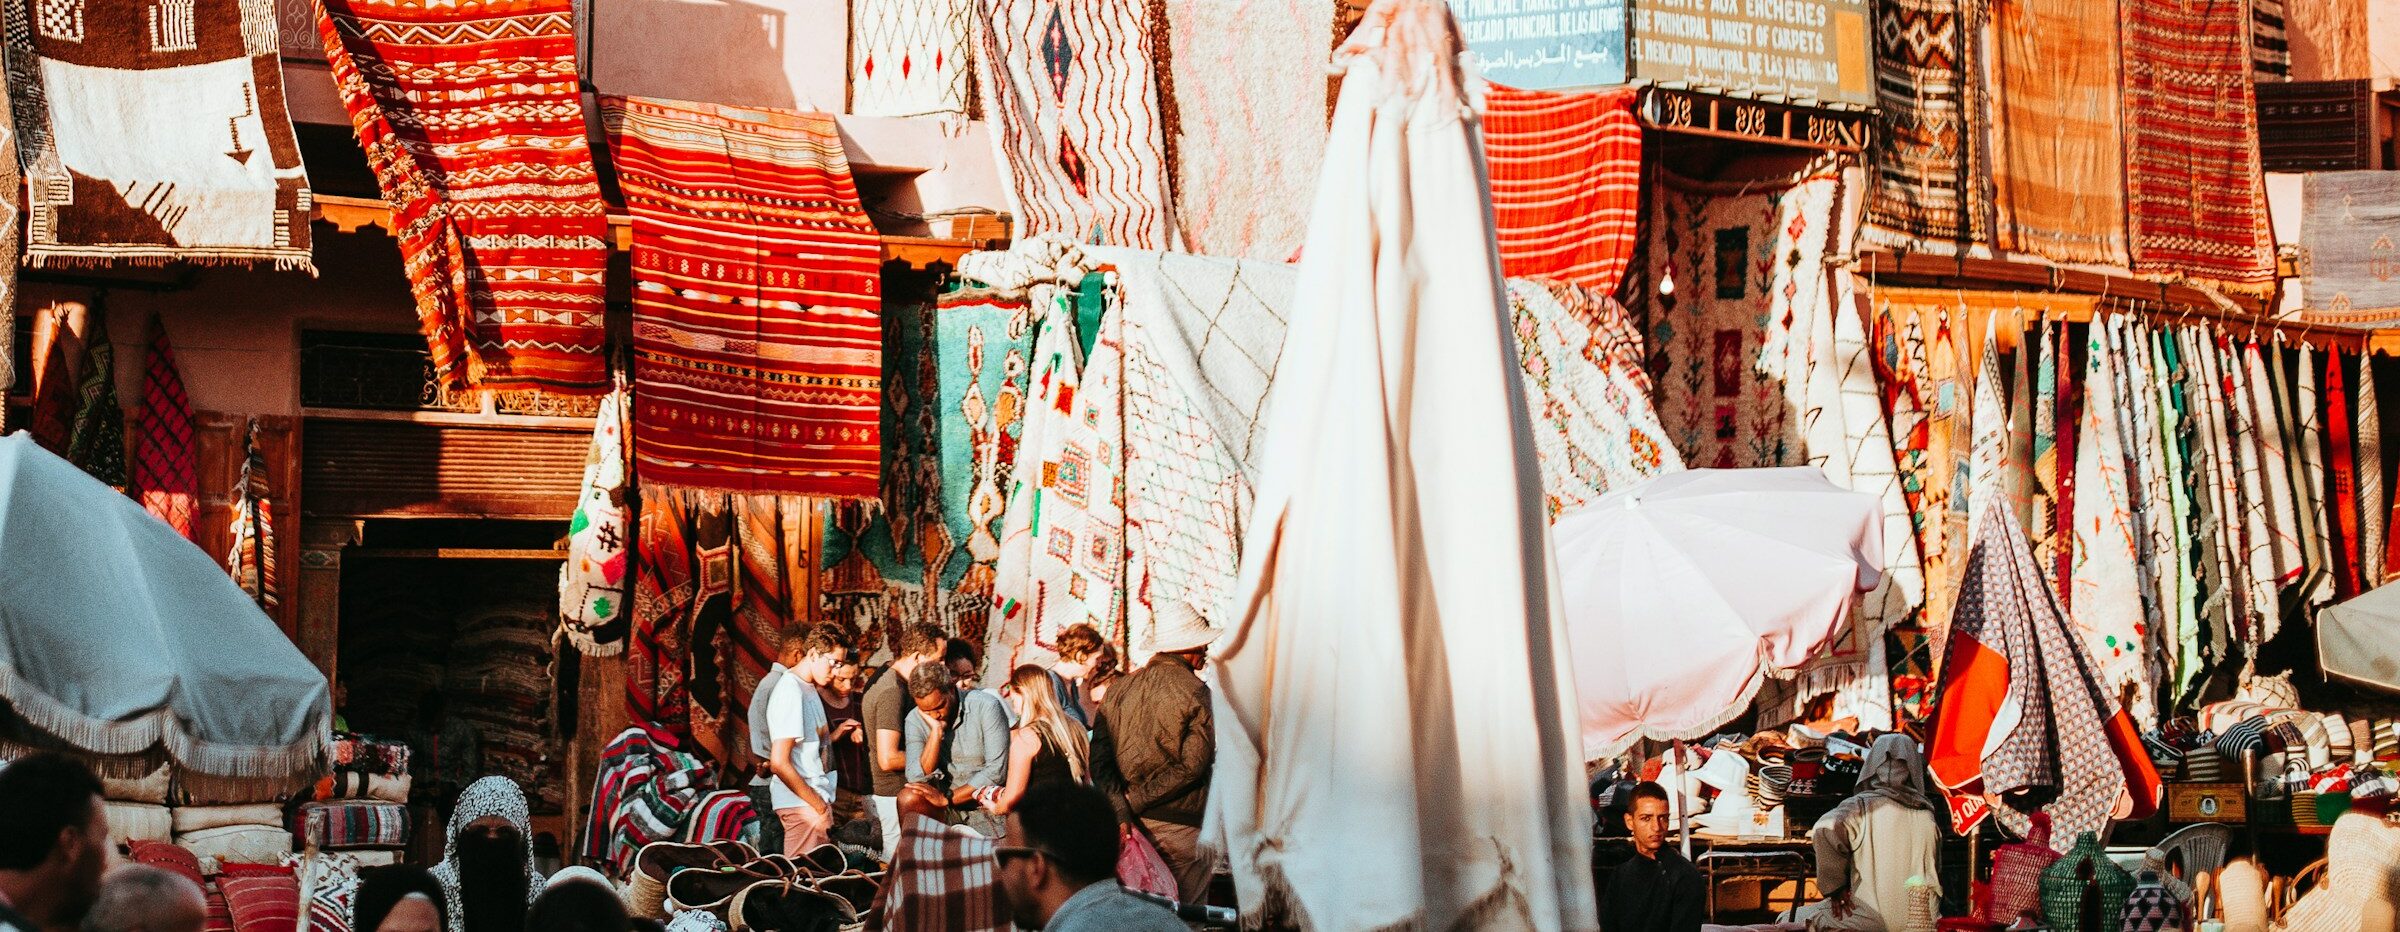 Guide to Marrakech's Souks